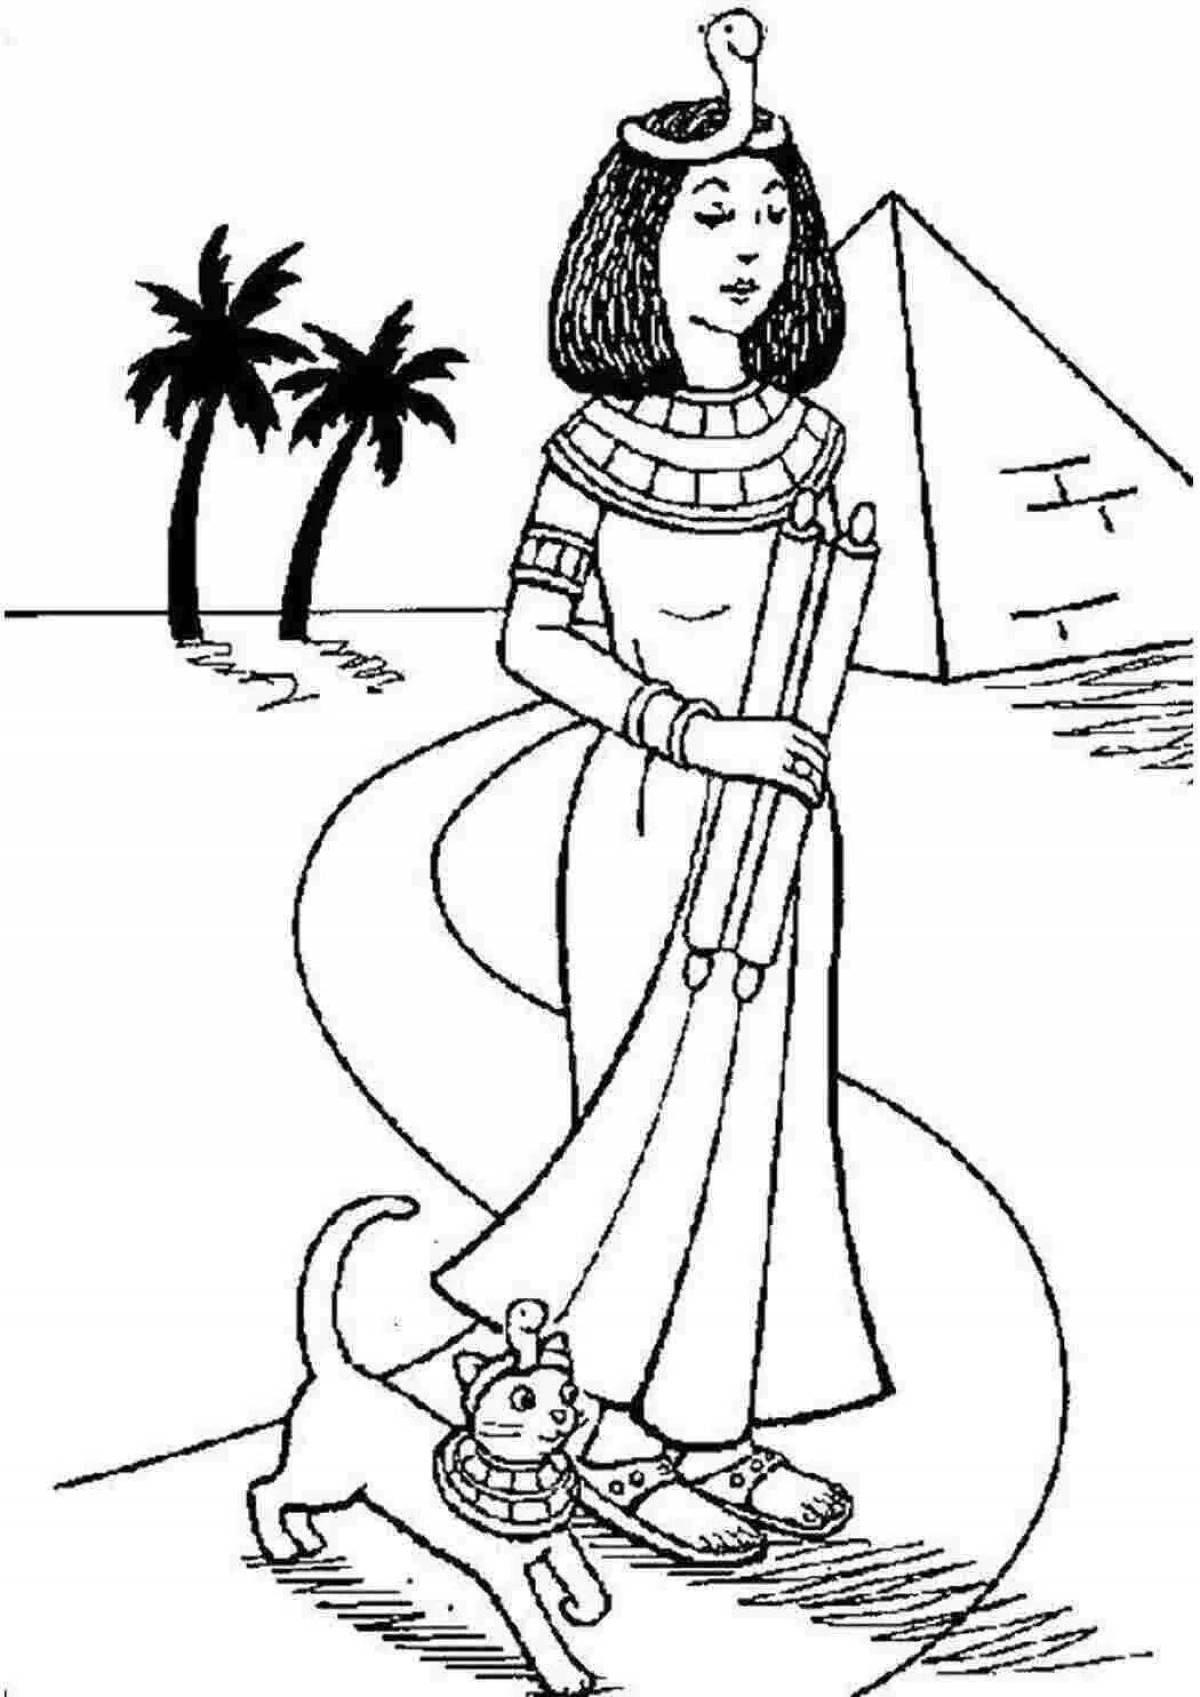 Incredible egypt coloring book for kids